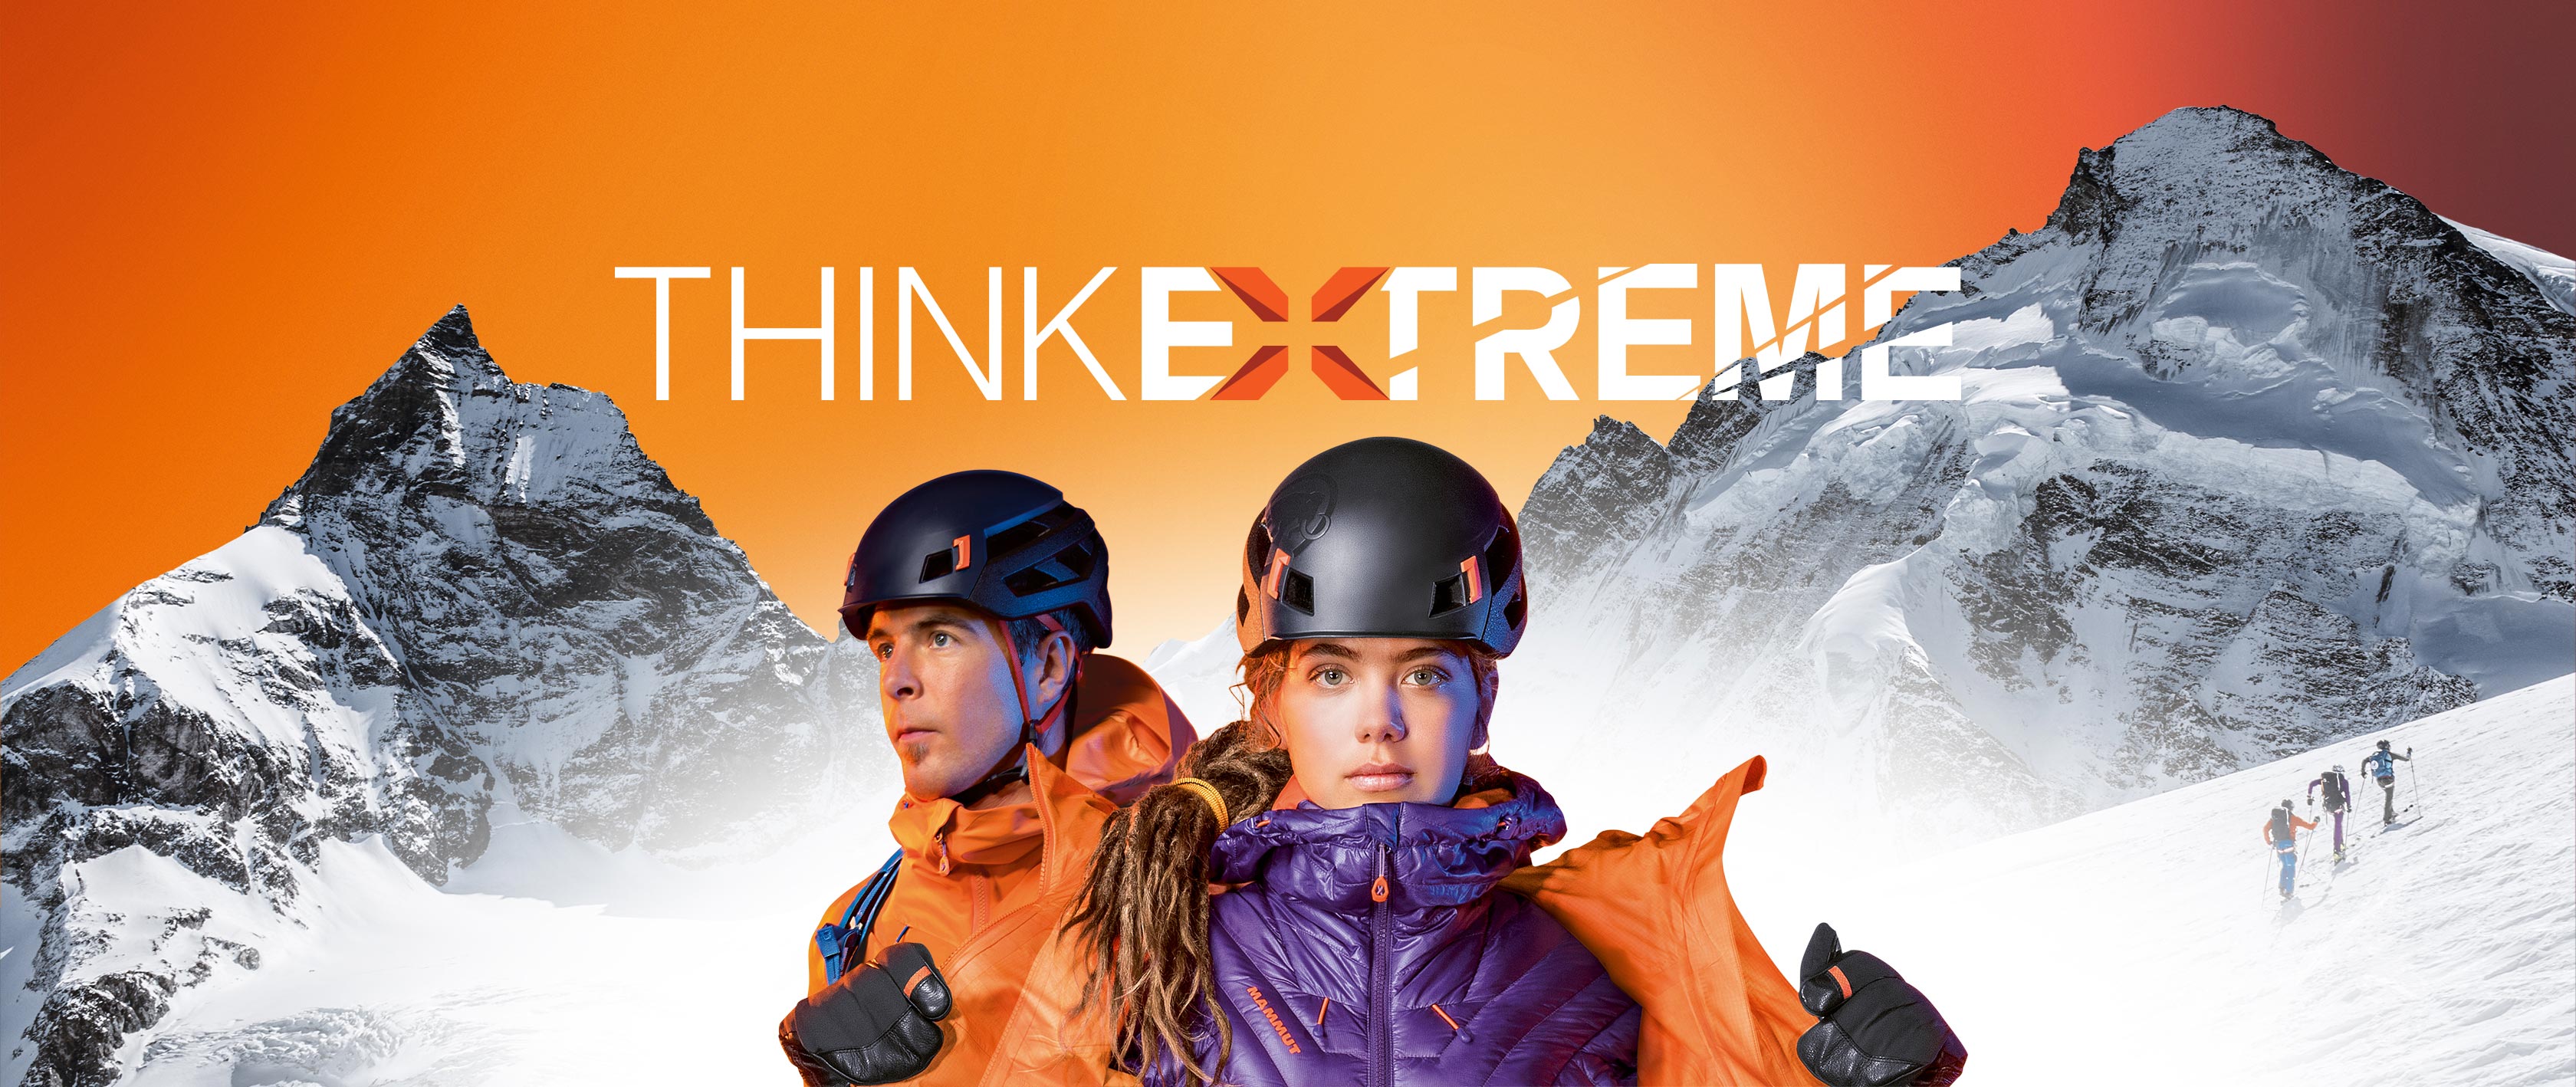 New flagship jacket and more from Mammut Eiger Extreme collection redesign